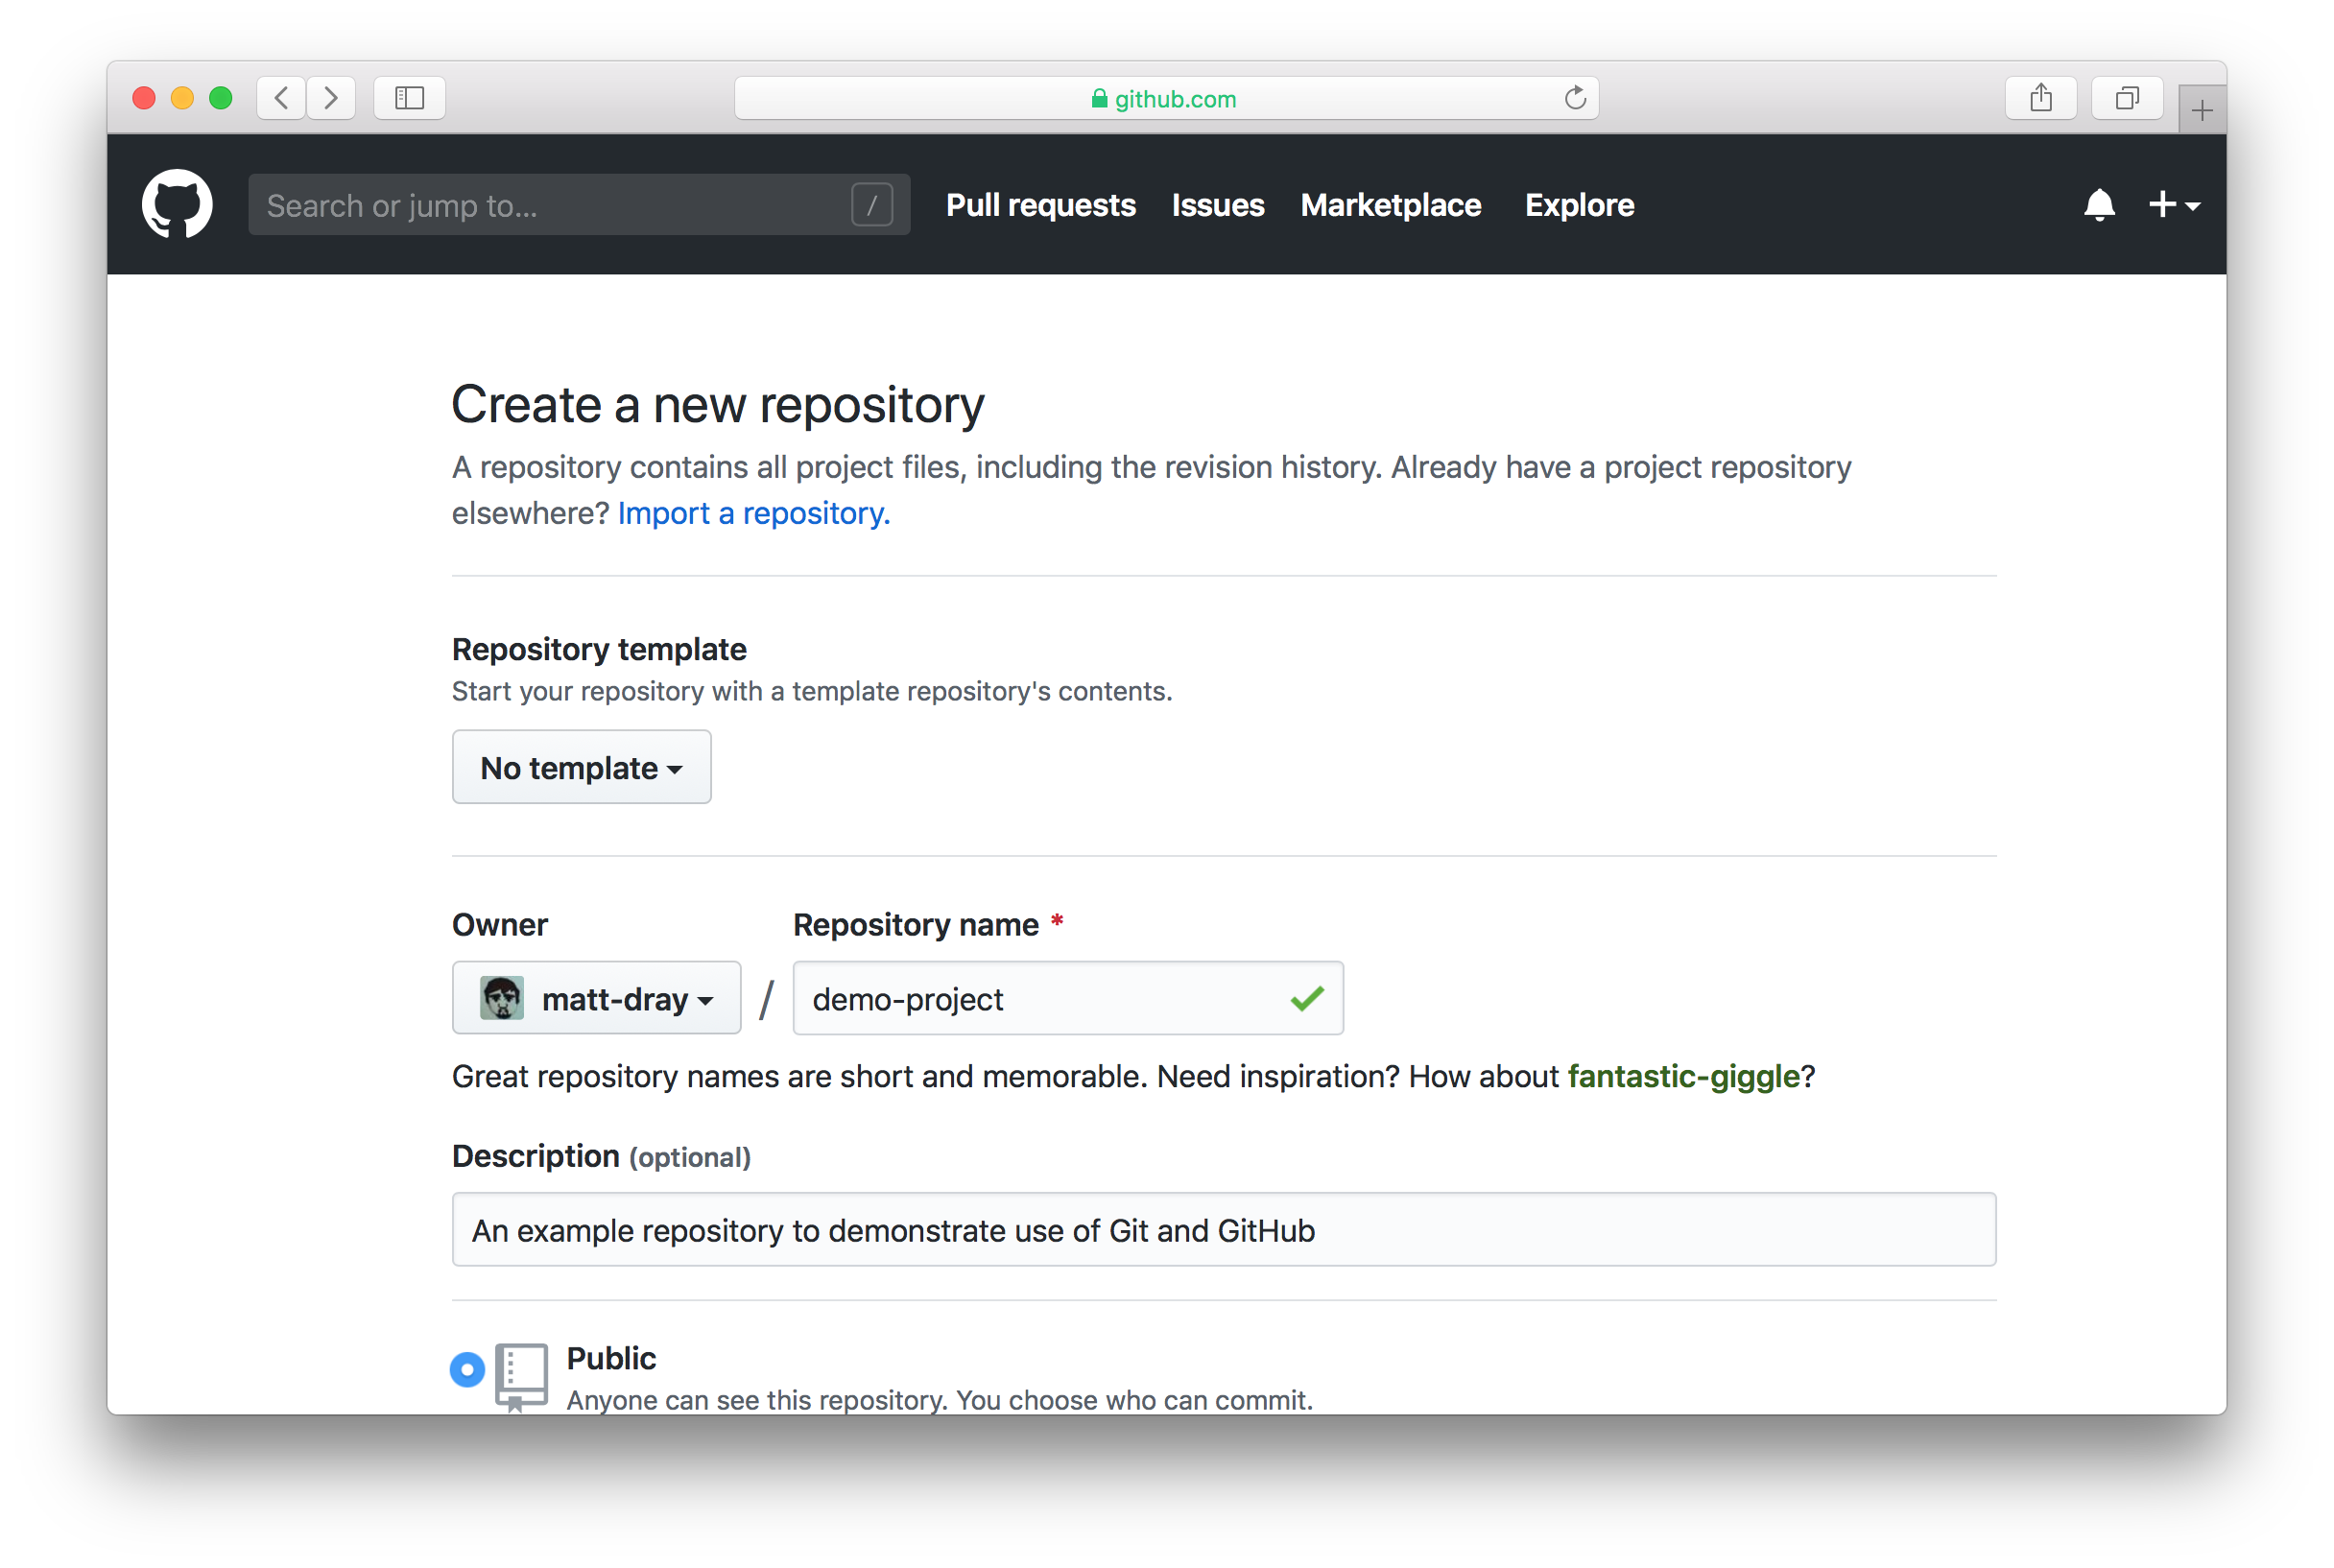 Setting up a new remote repository on GitHub by supplying a repository name and description.